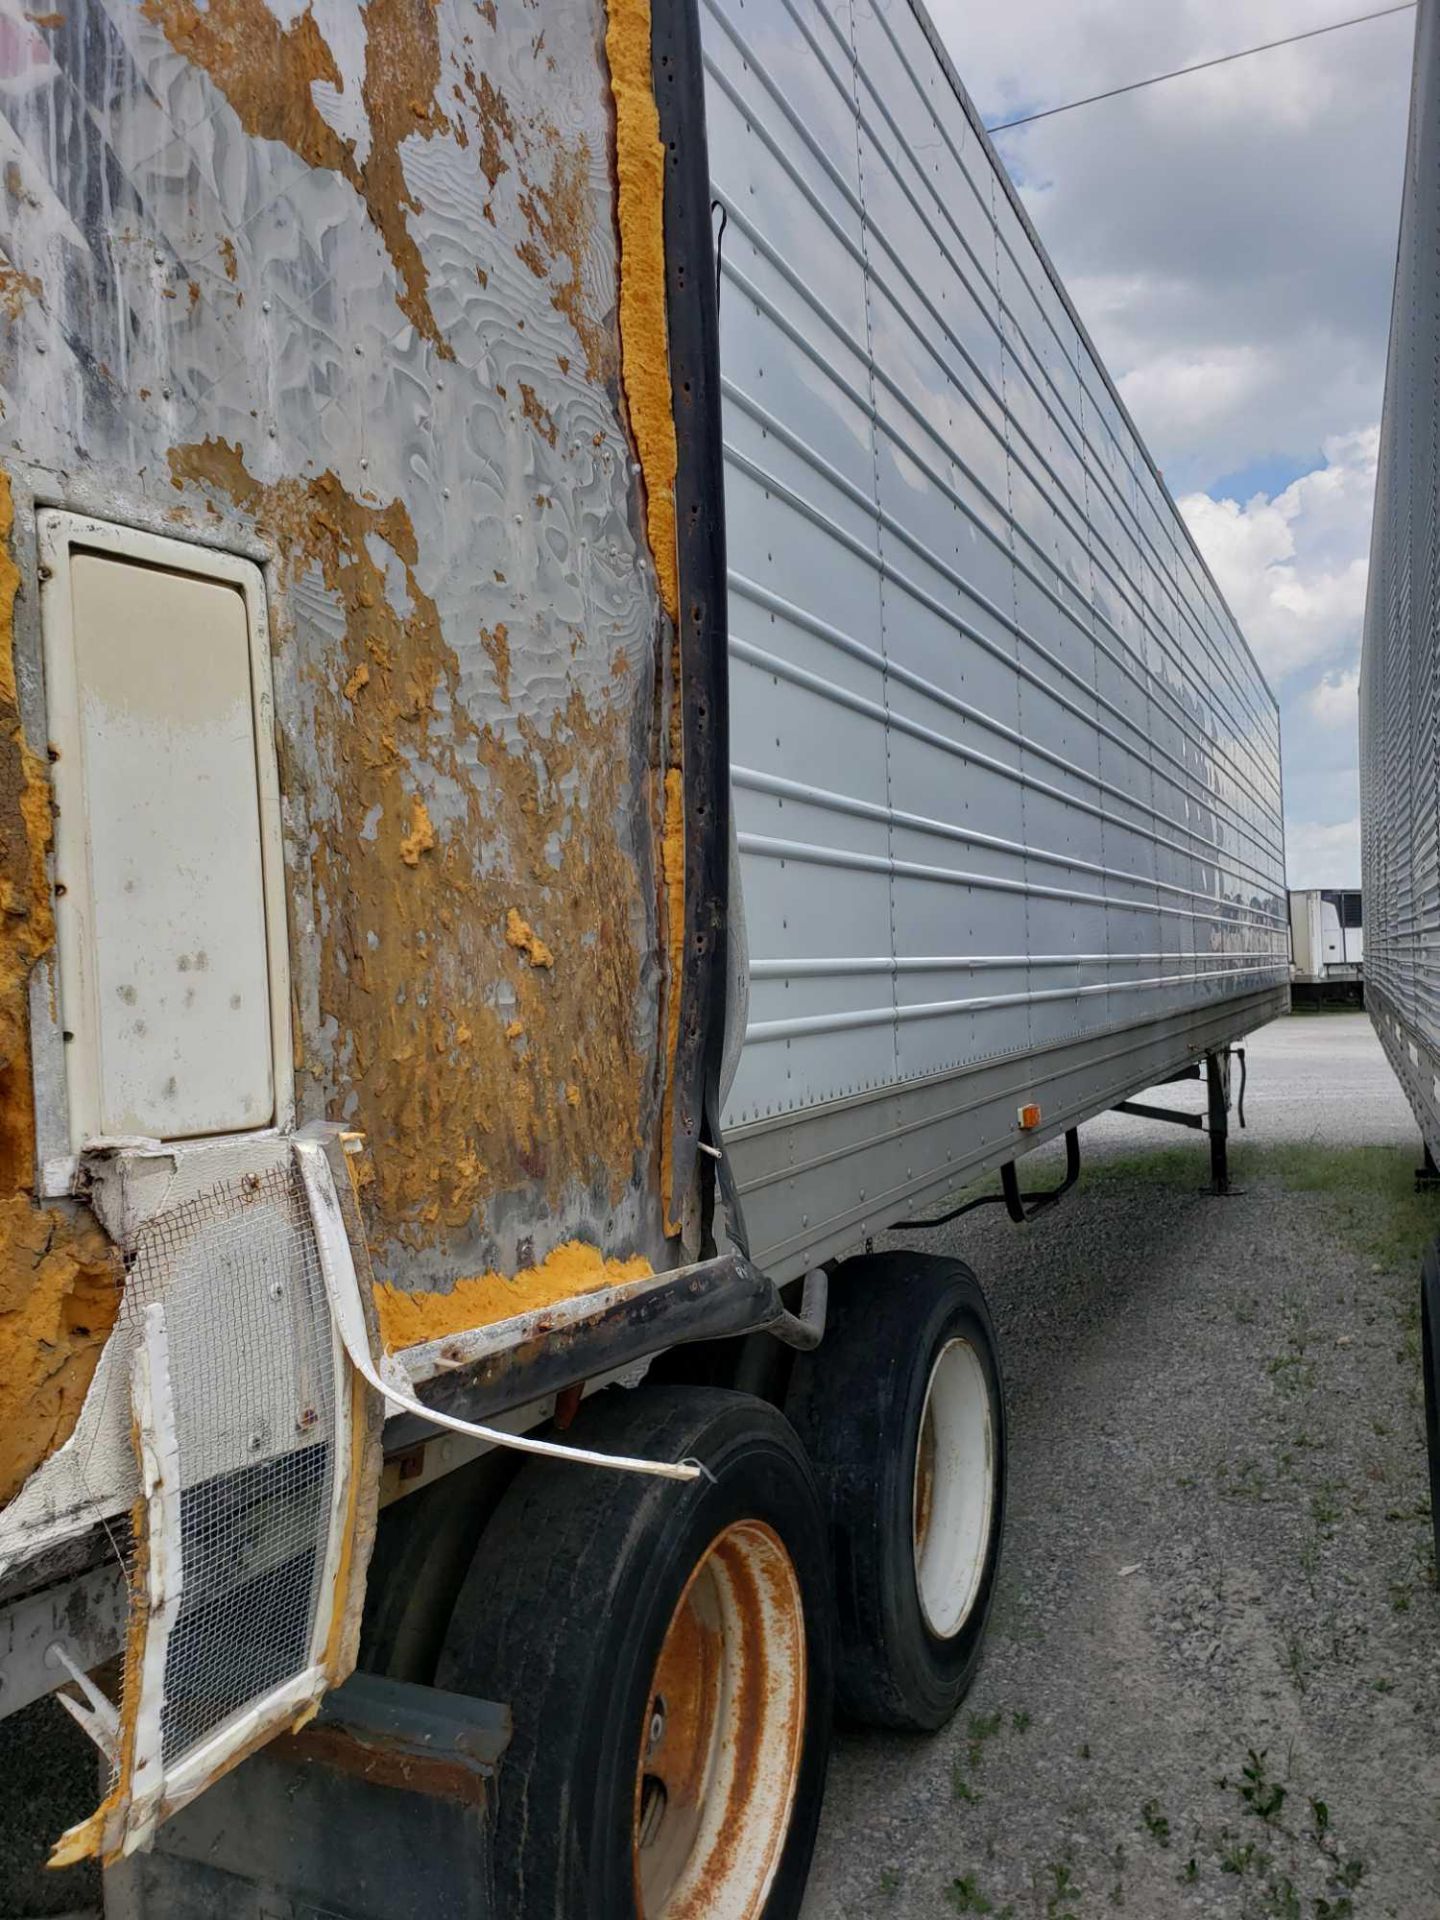 1991 Utility Trailer Company 53" trailer. VIN 1UYVS2480NM655711. Trailer is titled. No reefer unit. - Image 13 of 15